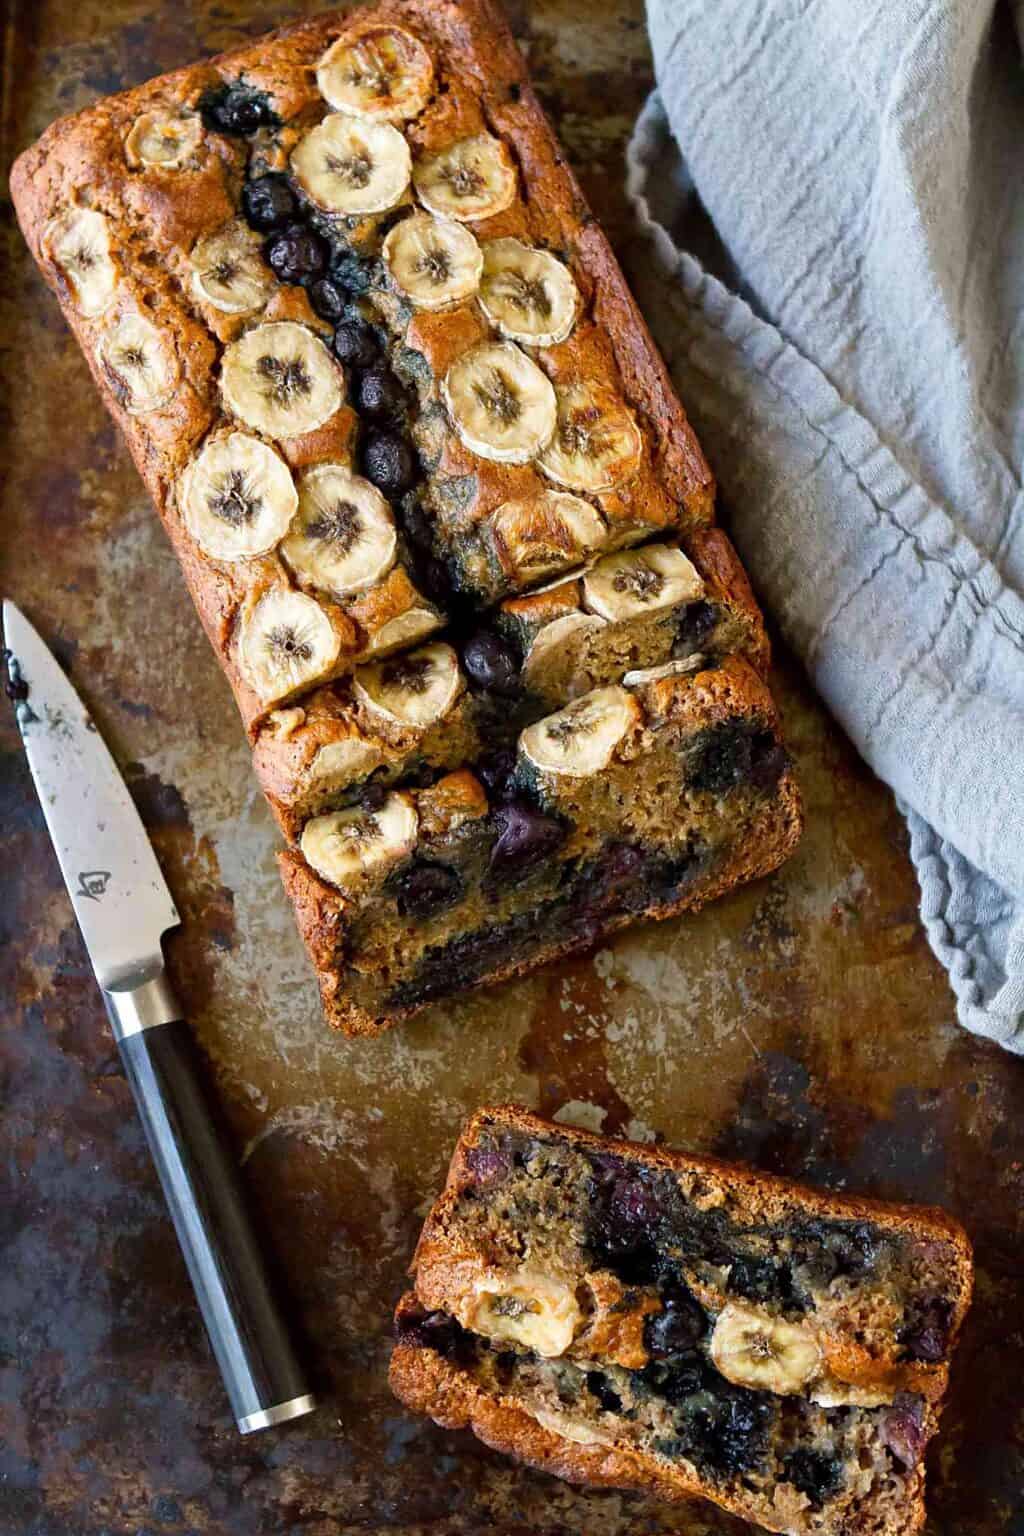 You would never guess that this Skinny Banana Bread with Blueberries has a fraction of the calories and fat of a traditional banana bread recipe. Tender with a ton of flavor! 139 calories and 3 Weight Watchers SP | Recipe easy | Moist | Healthy | Without Oil | No Oil | Applesauce | Homemade | Best | Blueberry #bananabread #skinnybananabread #quickbread #weightwatchers #smartpoints